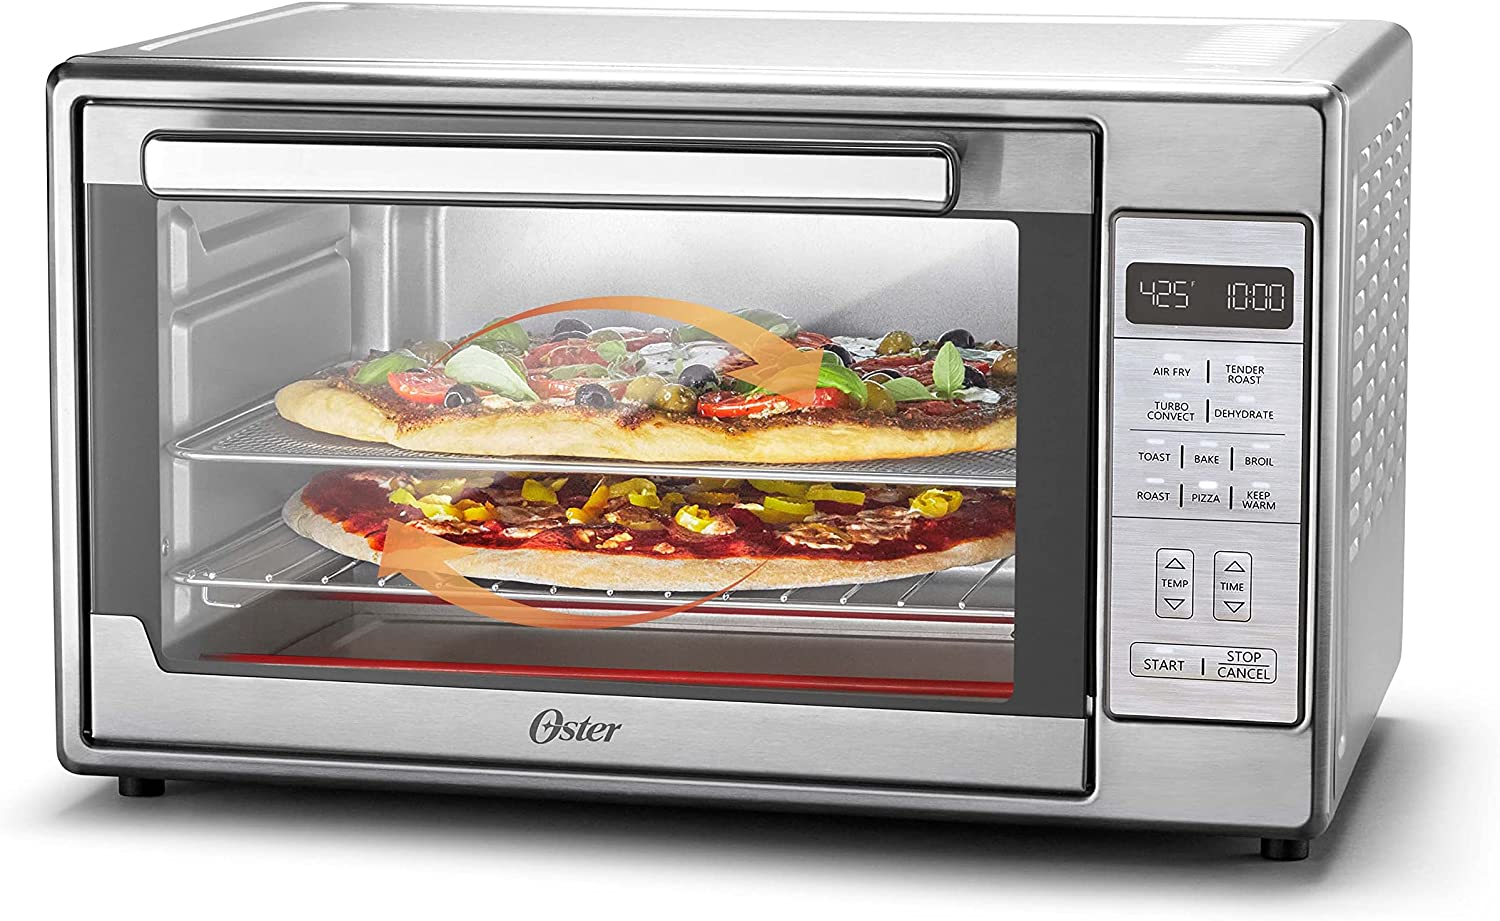 oster air fryer oven, 10 in 1 countertop toaster oven